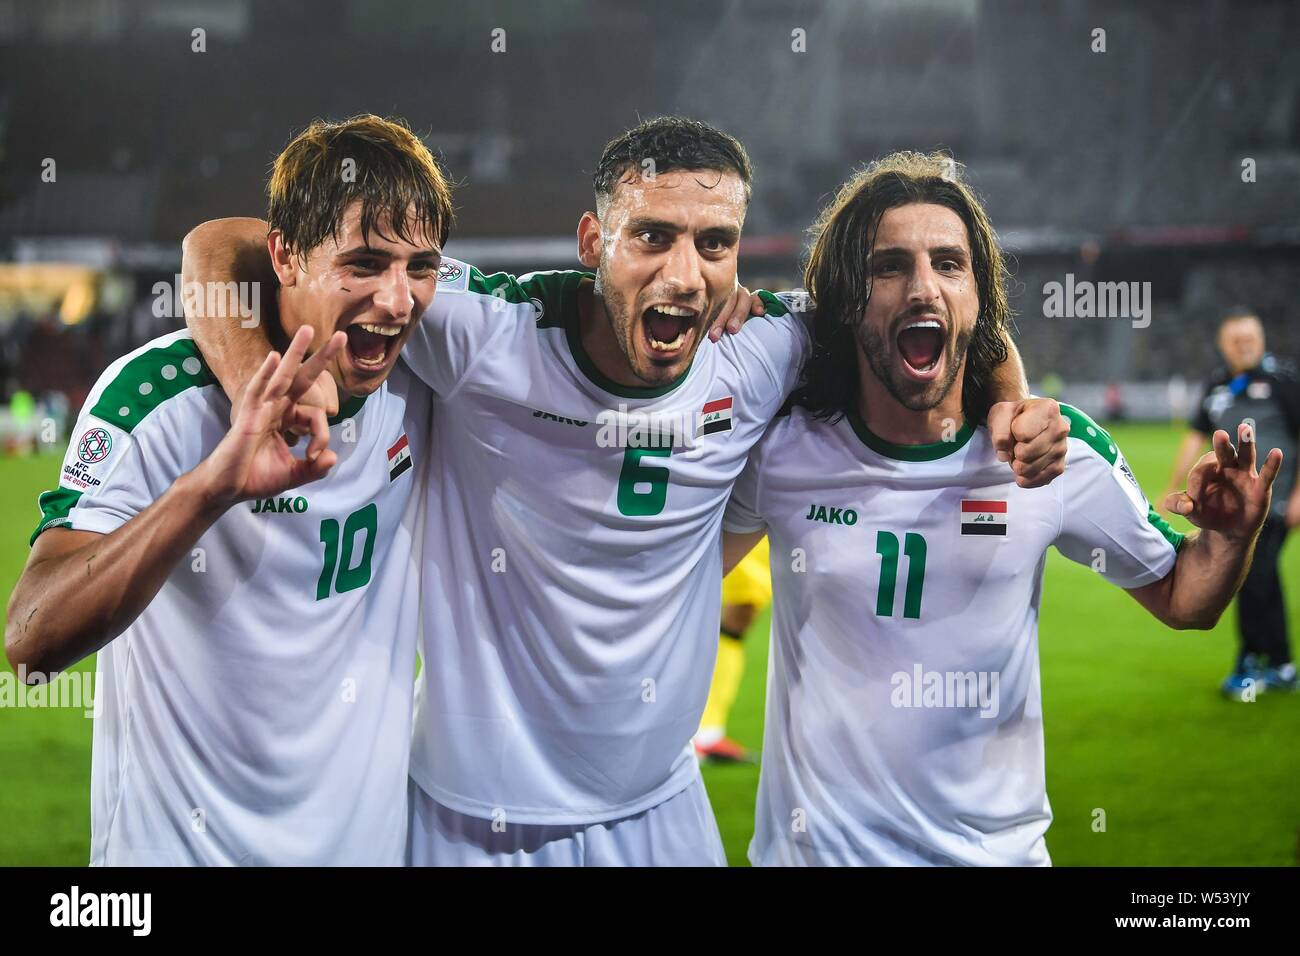 players-of-iraq-national-football-team-celebrate-after-defeating-vietnam-national-football-team-in-the-afc-asian-cup-group-d-match-in-abu-dhabi-unite-W53YJY.jpg